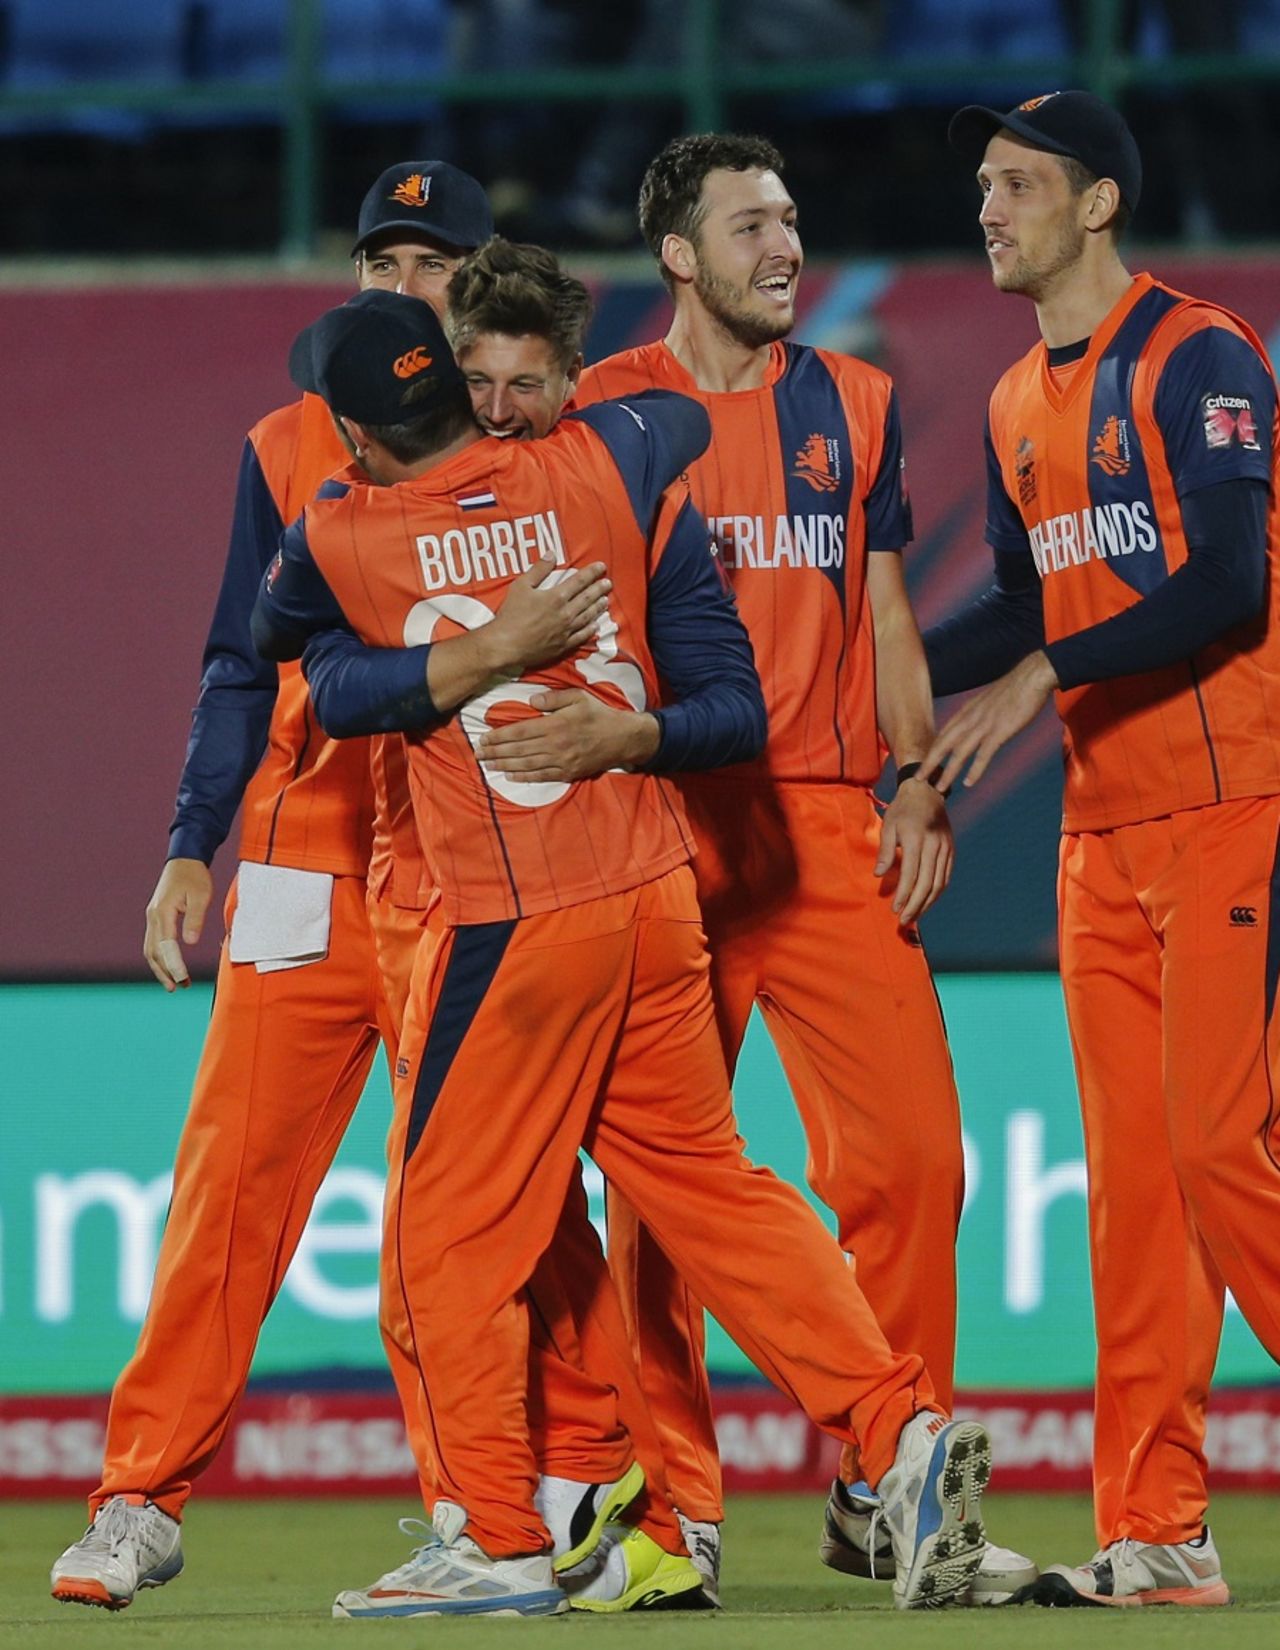 Netherlands players celebrate a wicket, Ireland v Netherlands, World T20 qualifiers, Group A, Dharamsala, March 13, 2016